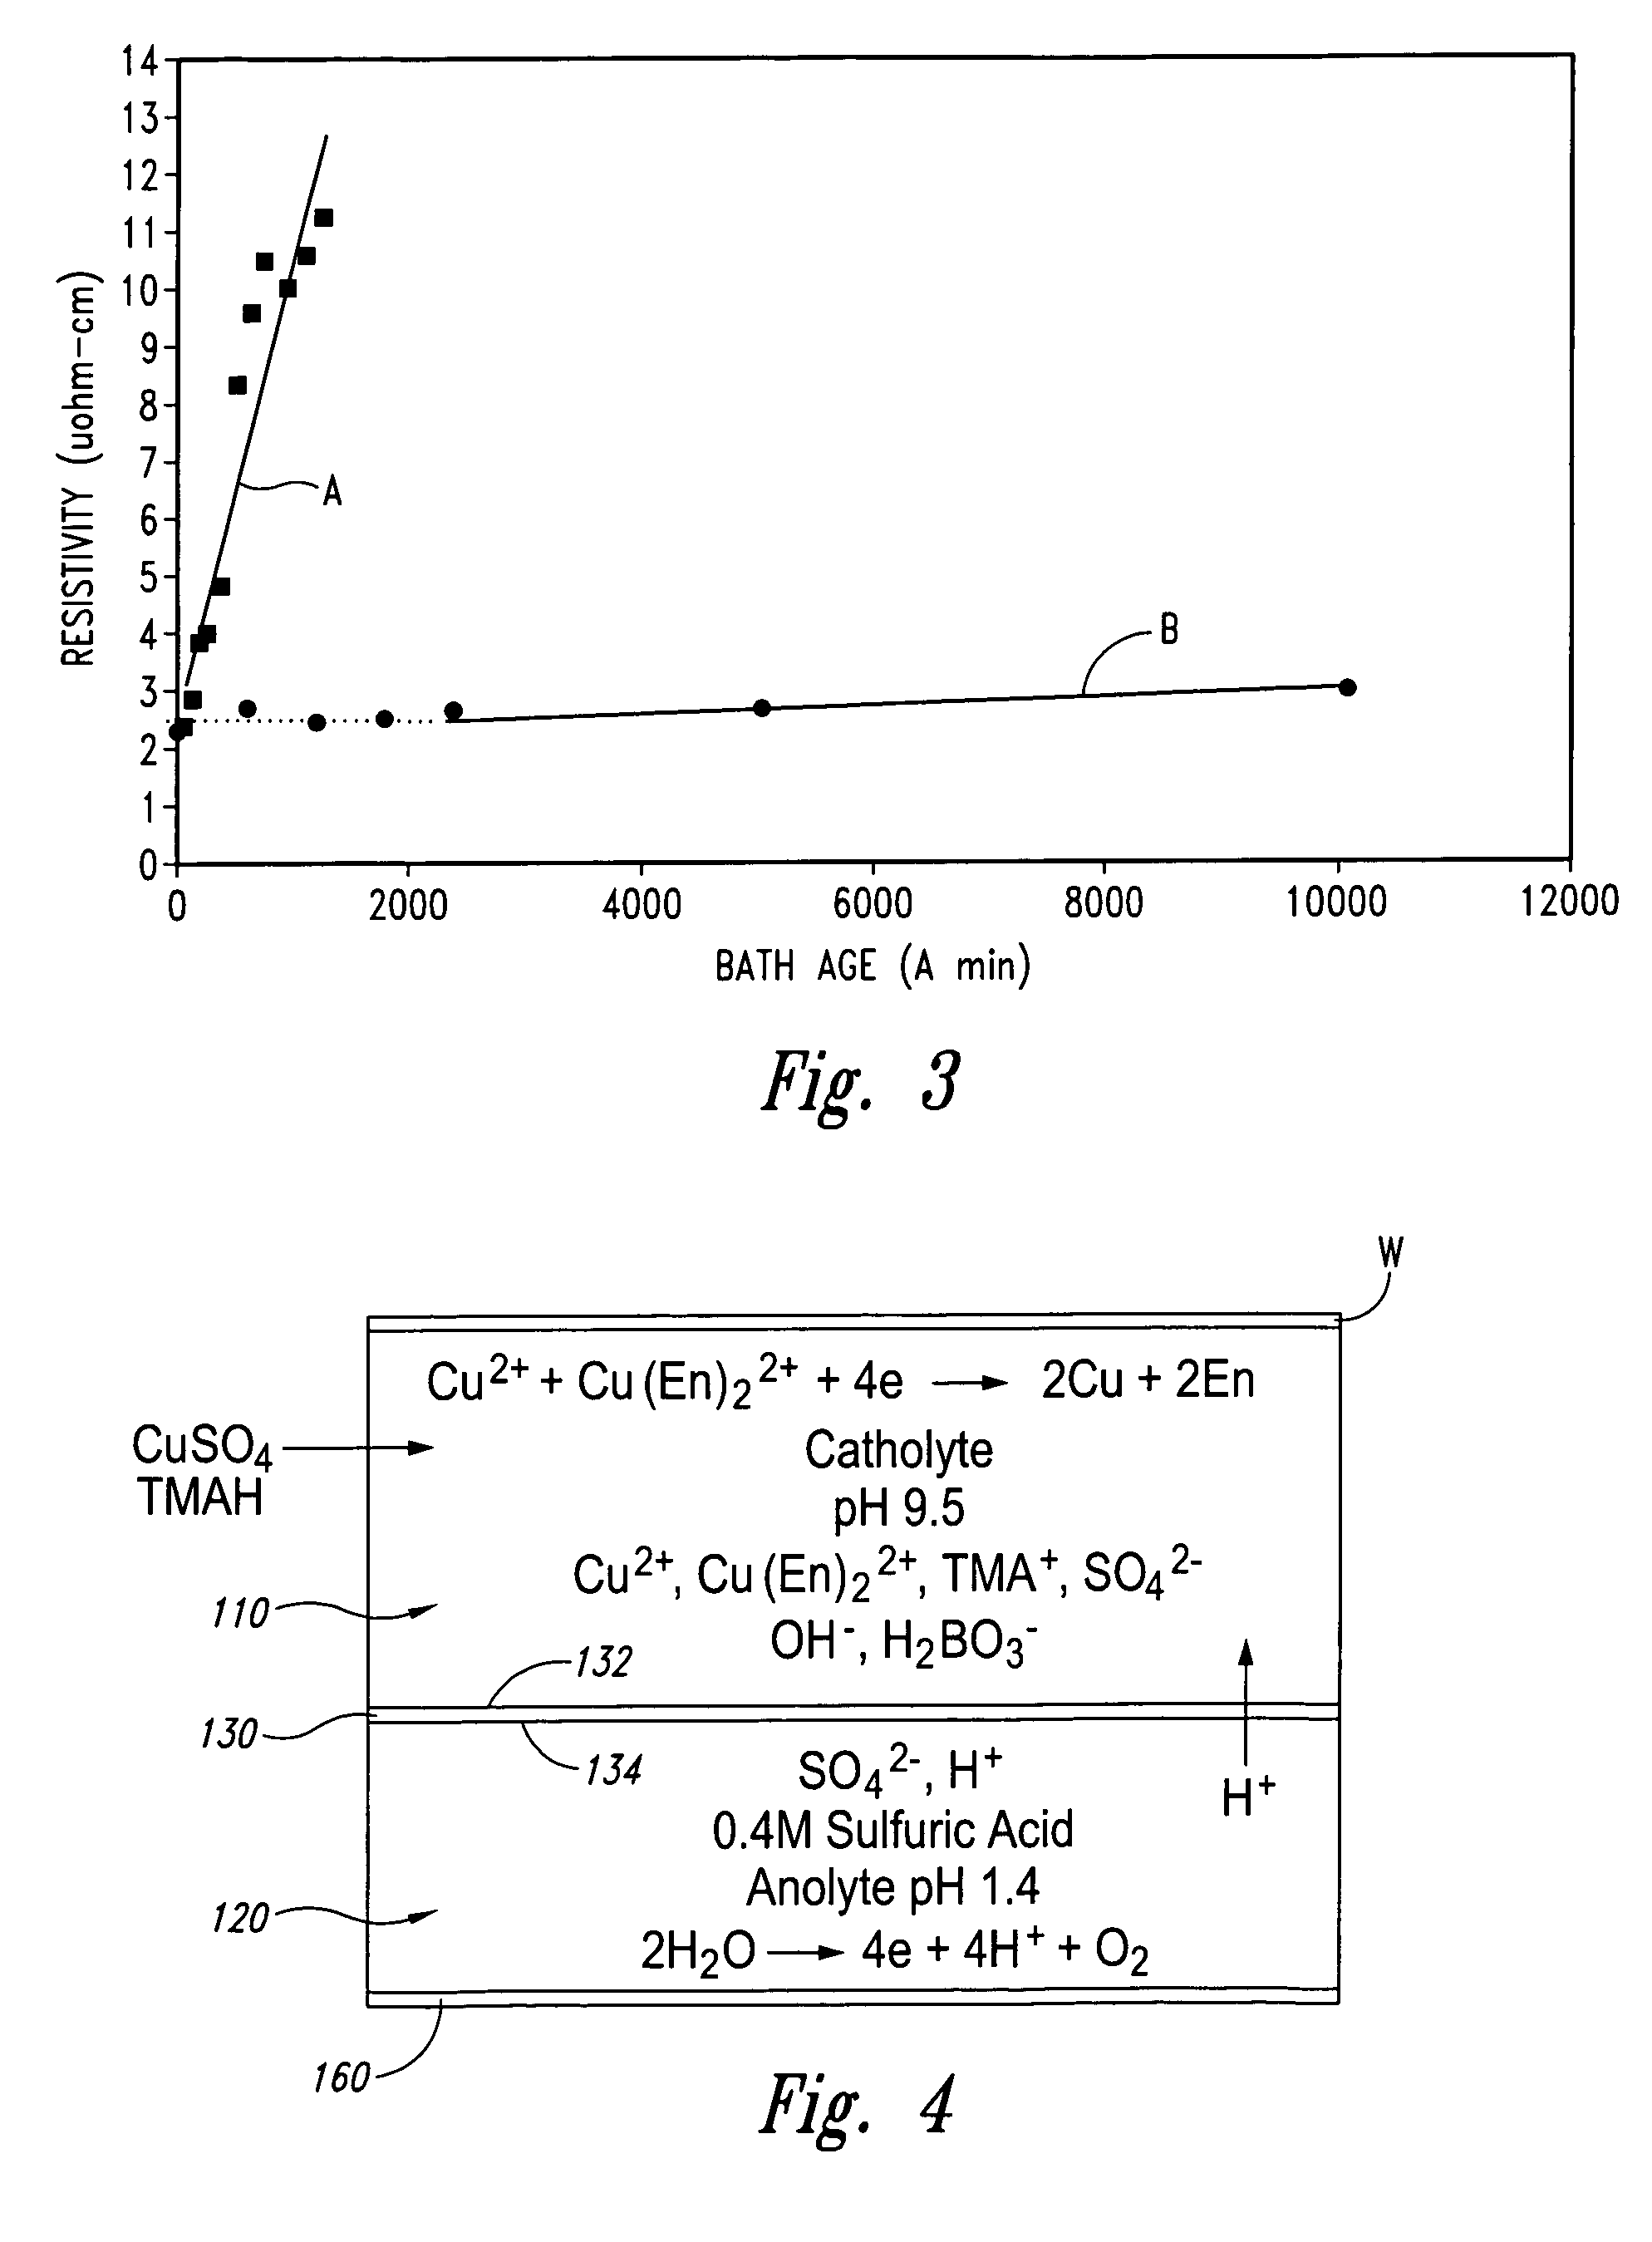 Reactors, systems, and methods for electroplating microfeature workpieces